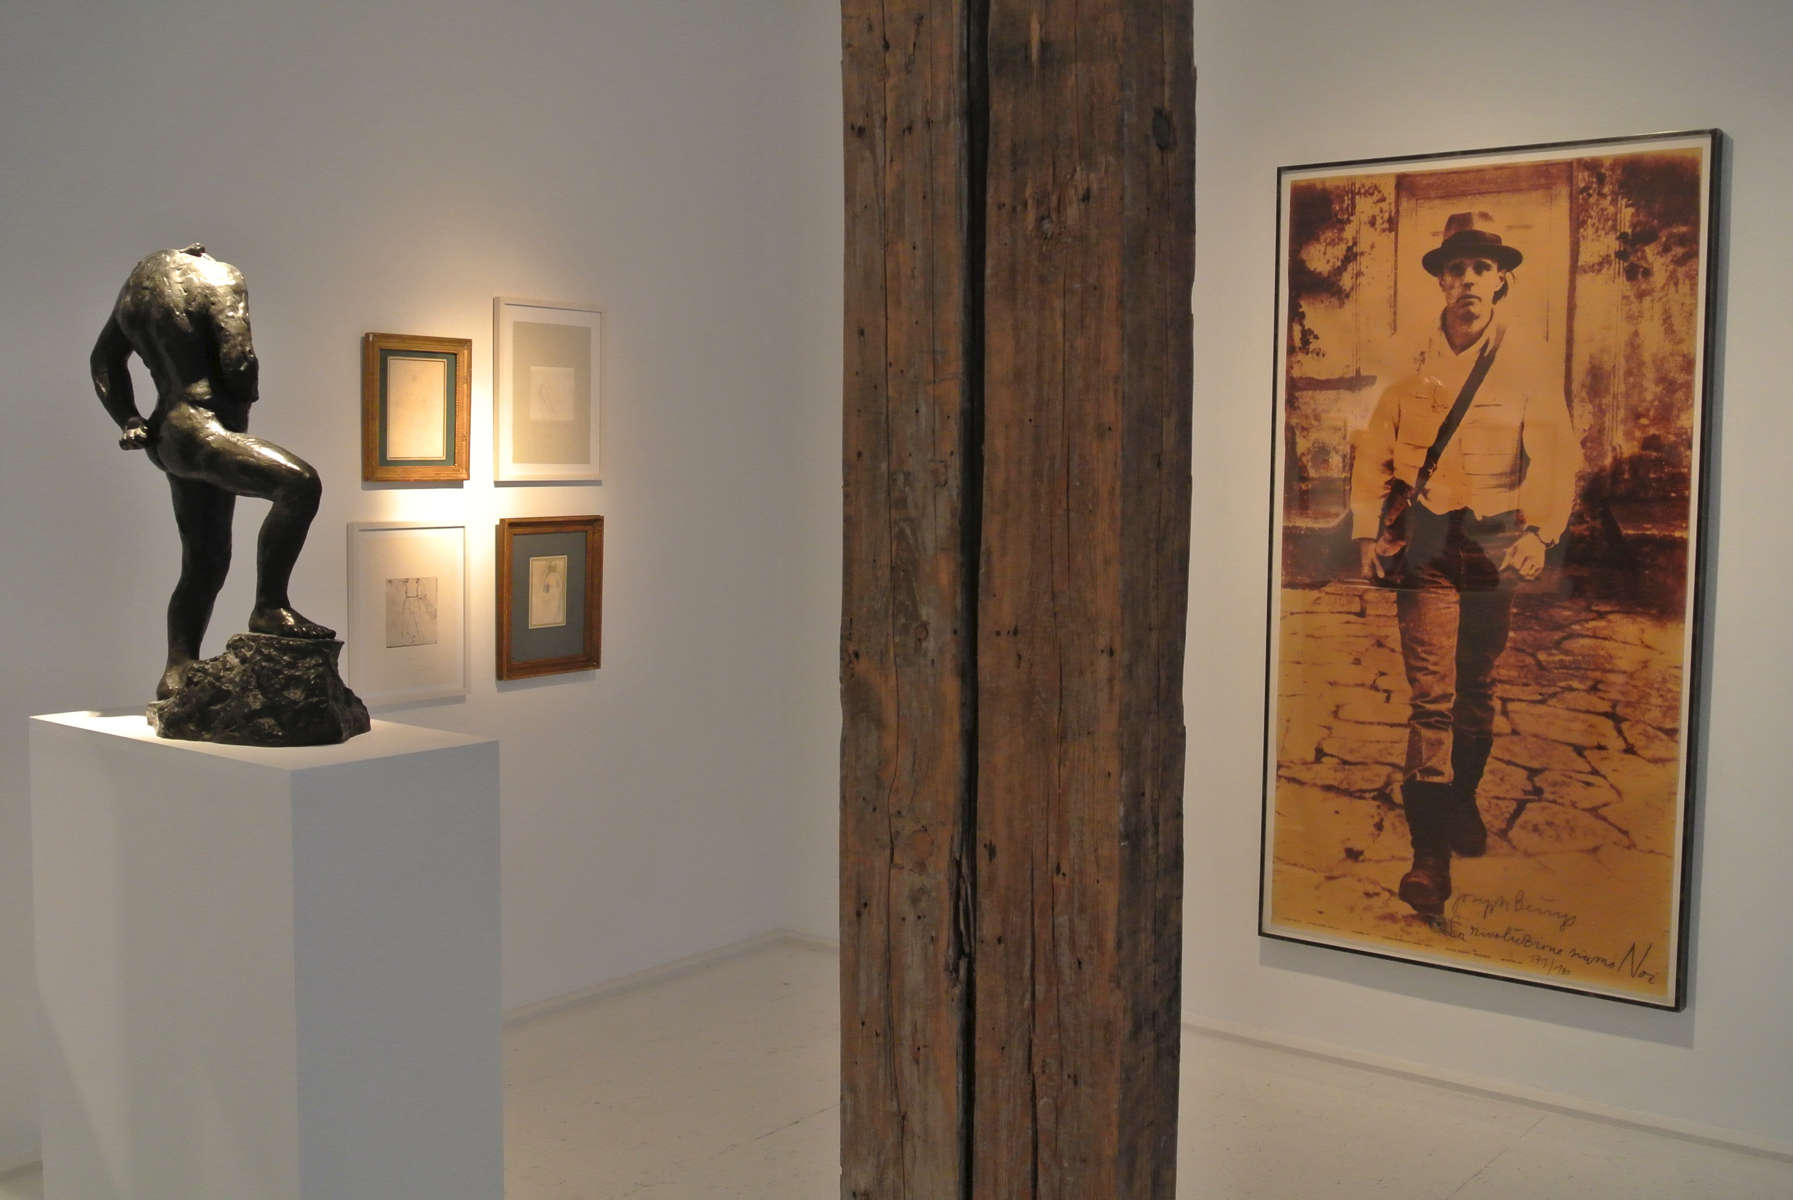 Installation view of "Rodin, Rilke, Beuys" at Akim Monet Side by Side Gallery <br>Photo: courtesy Akim Monet